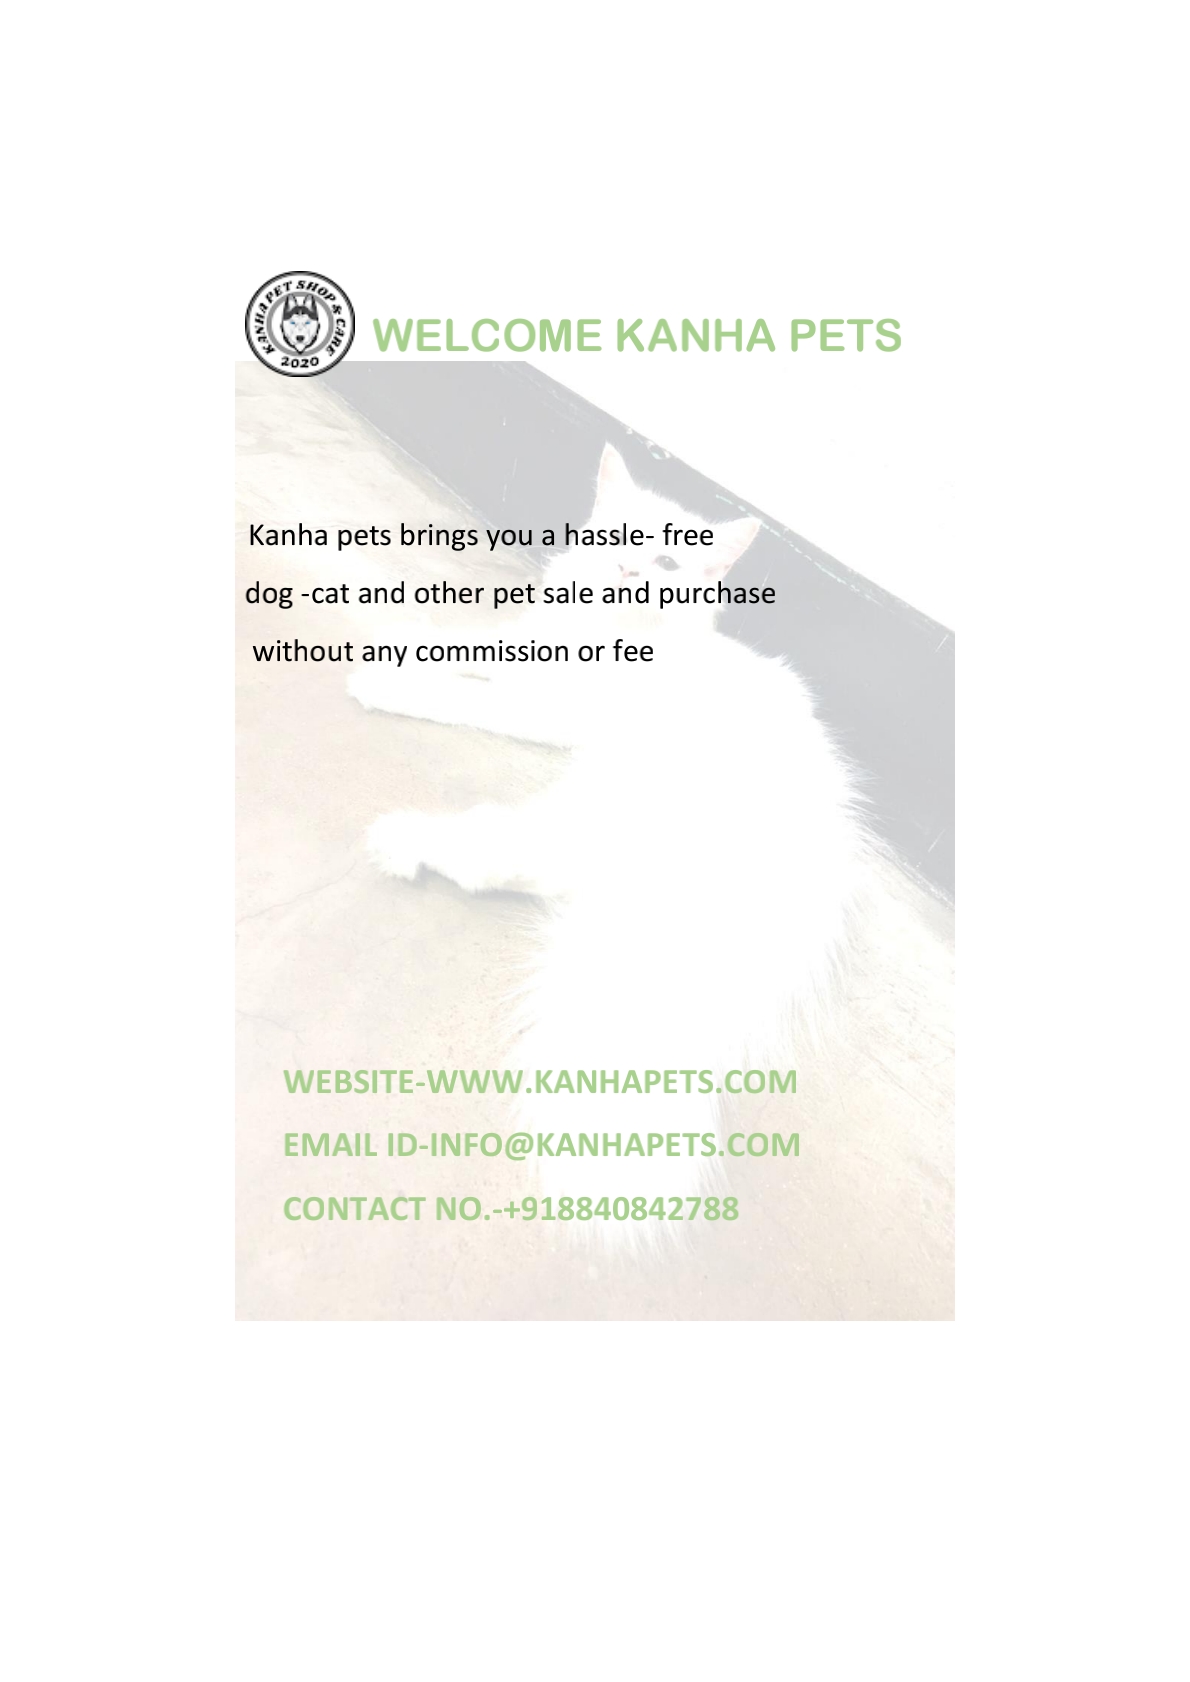 Kanha Pet brings you the best quality pets